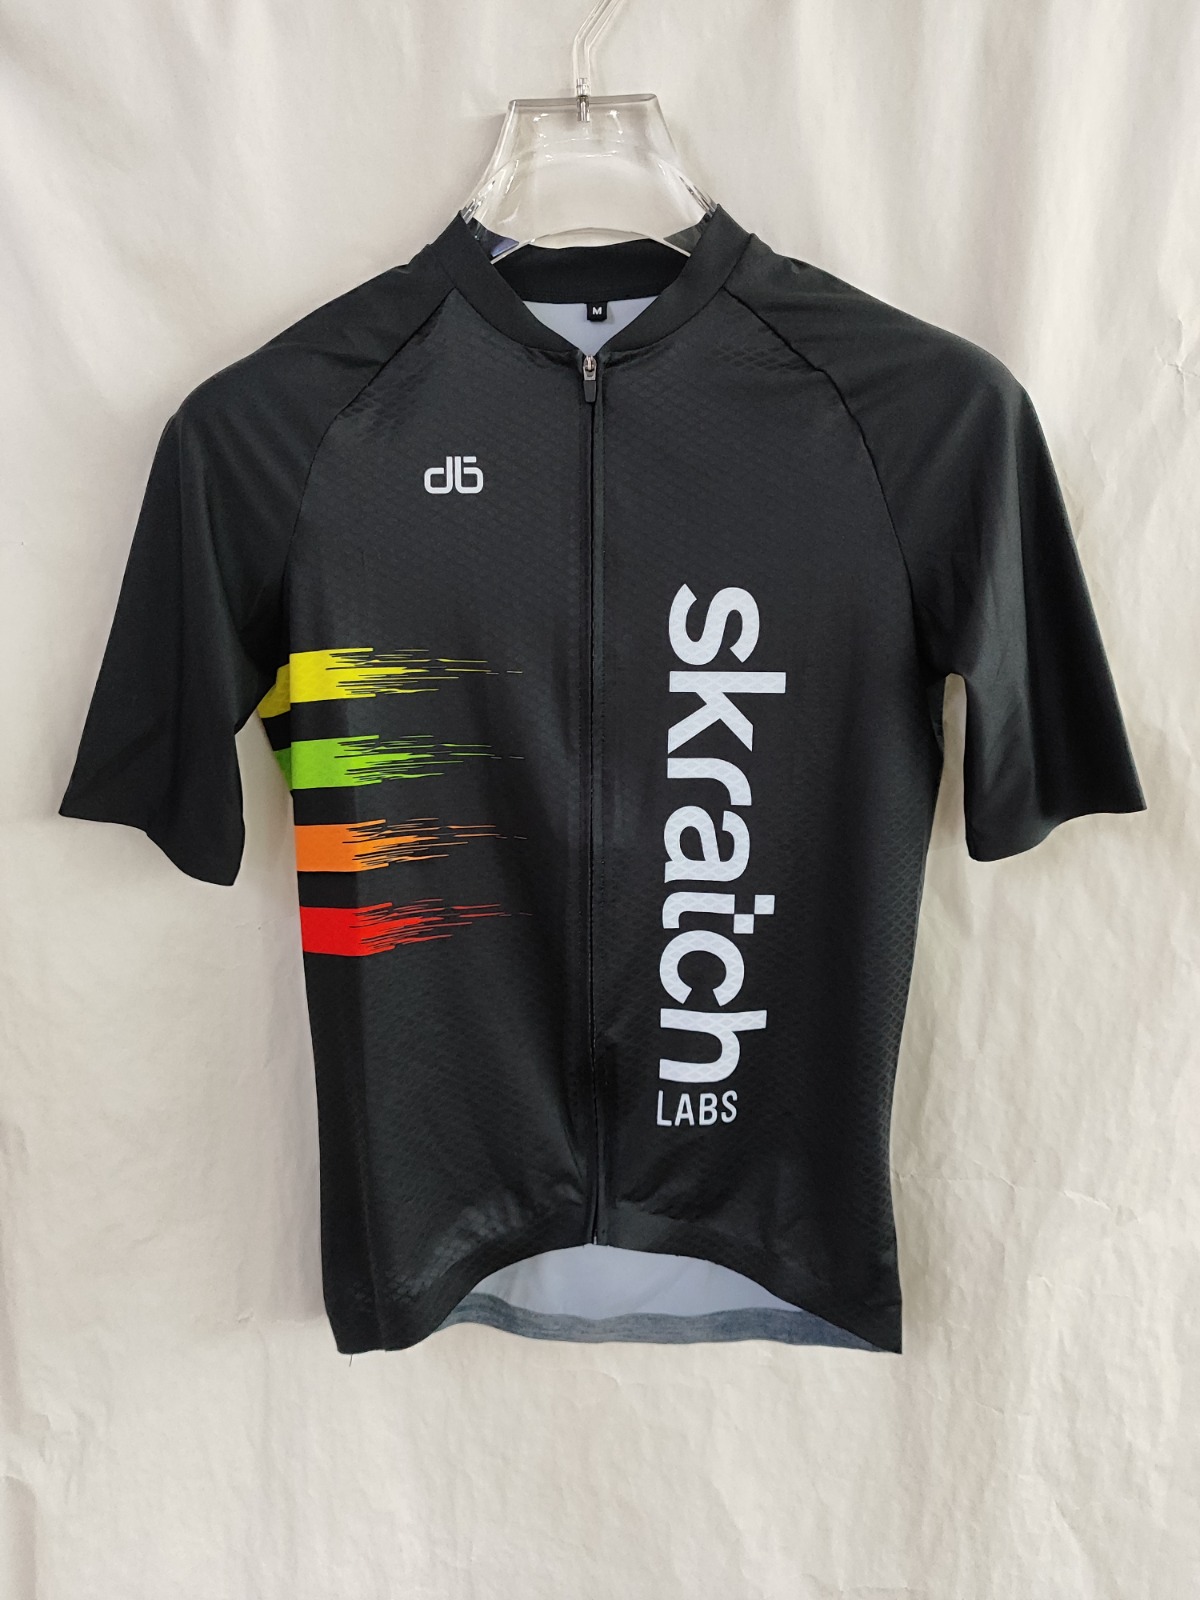 SkratchLabs Custom Cycling Jersey - Skratch Labs